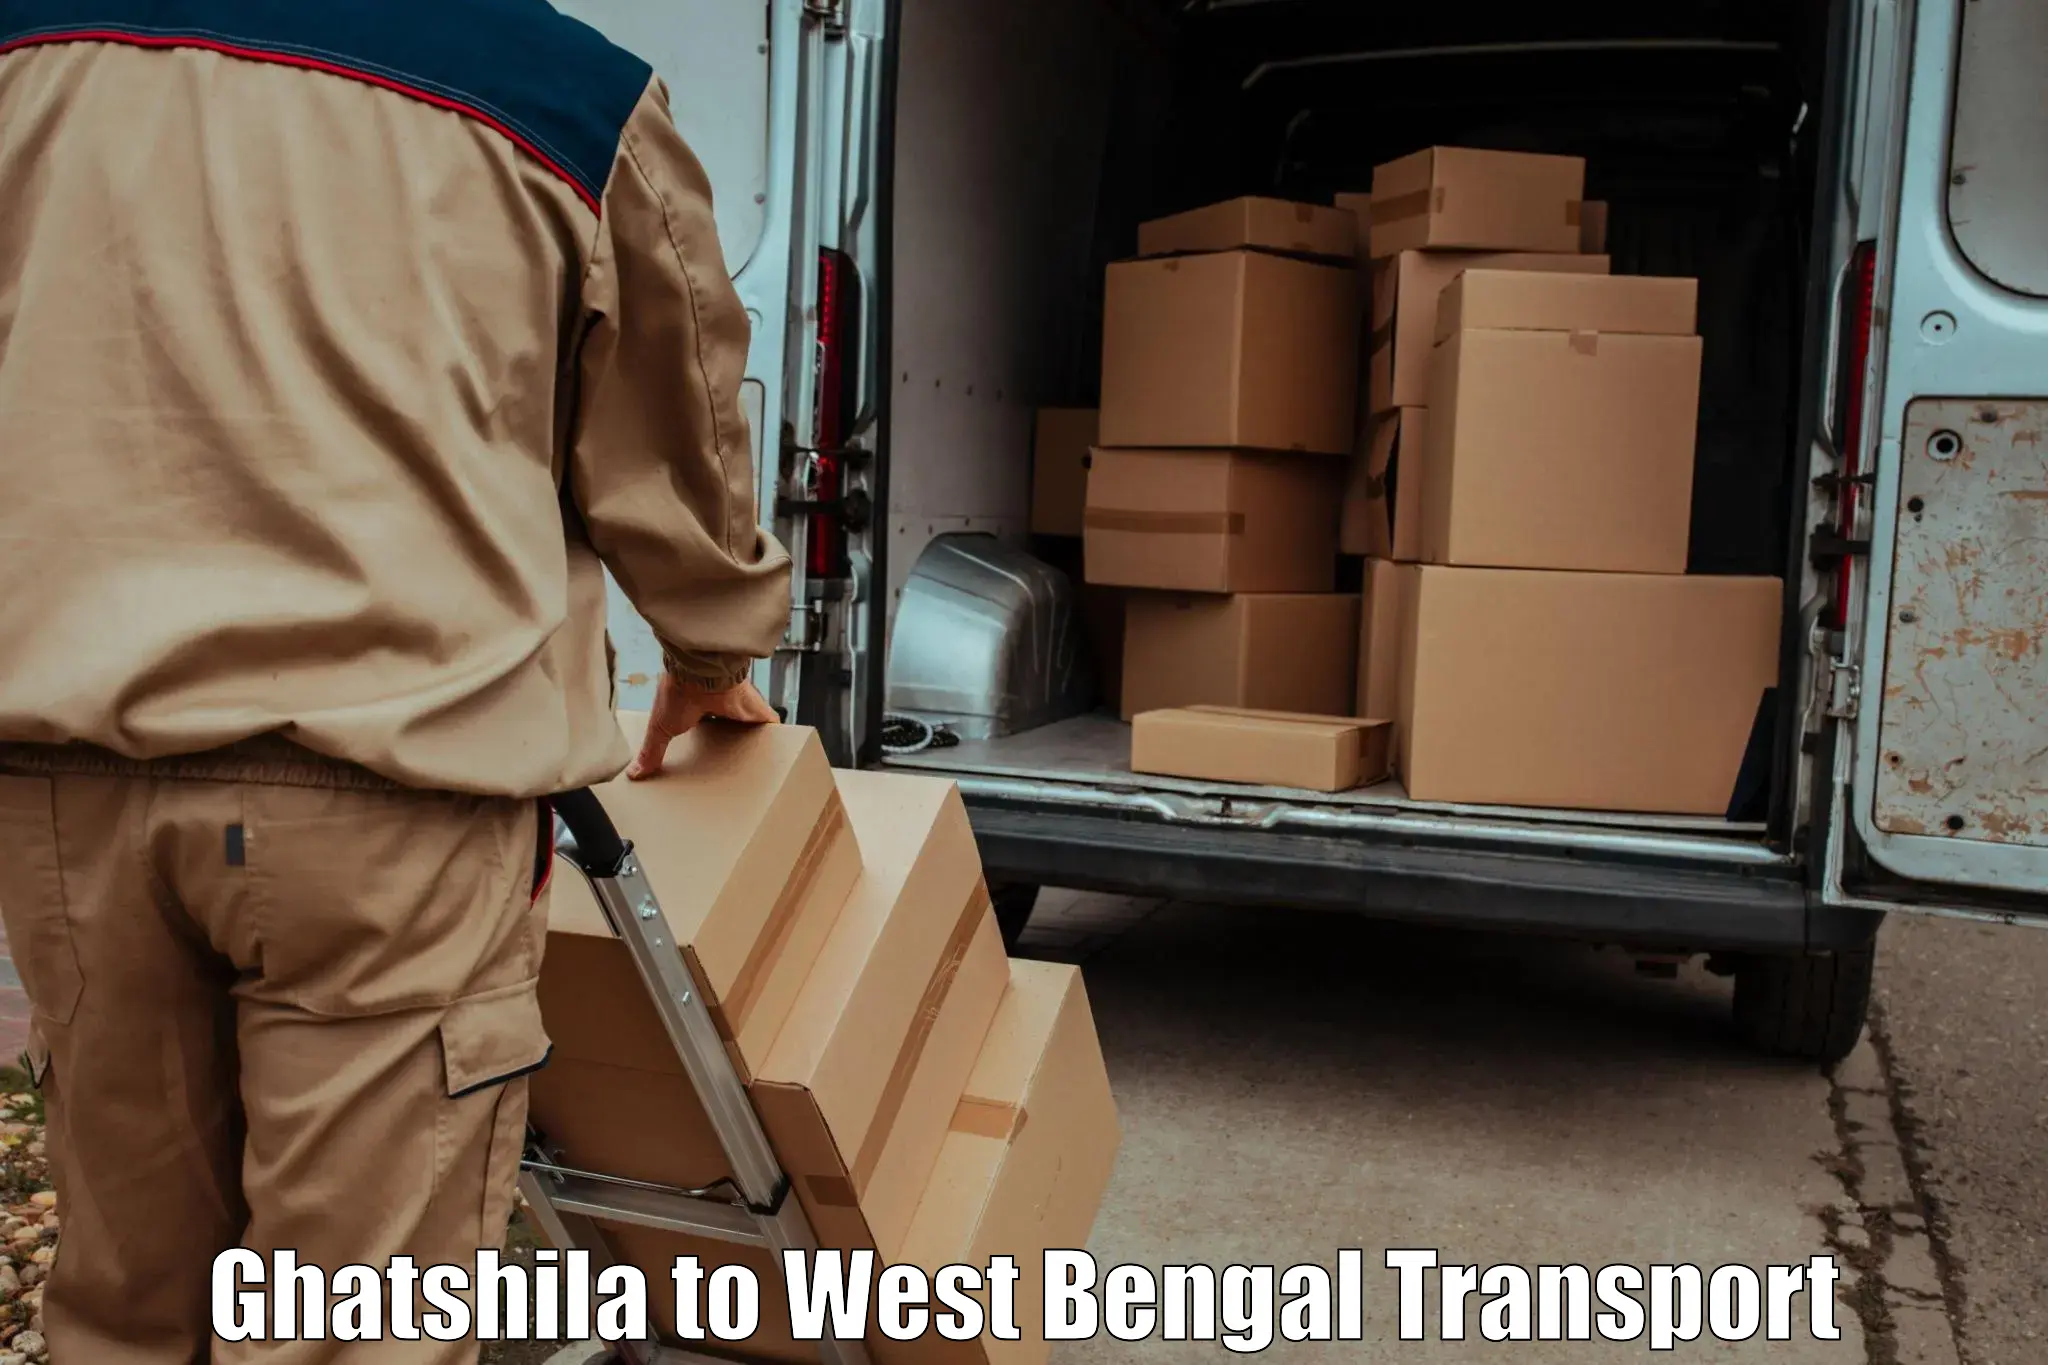 Cycle transportation service Ghatshila to West Bengal